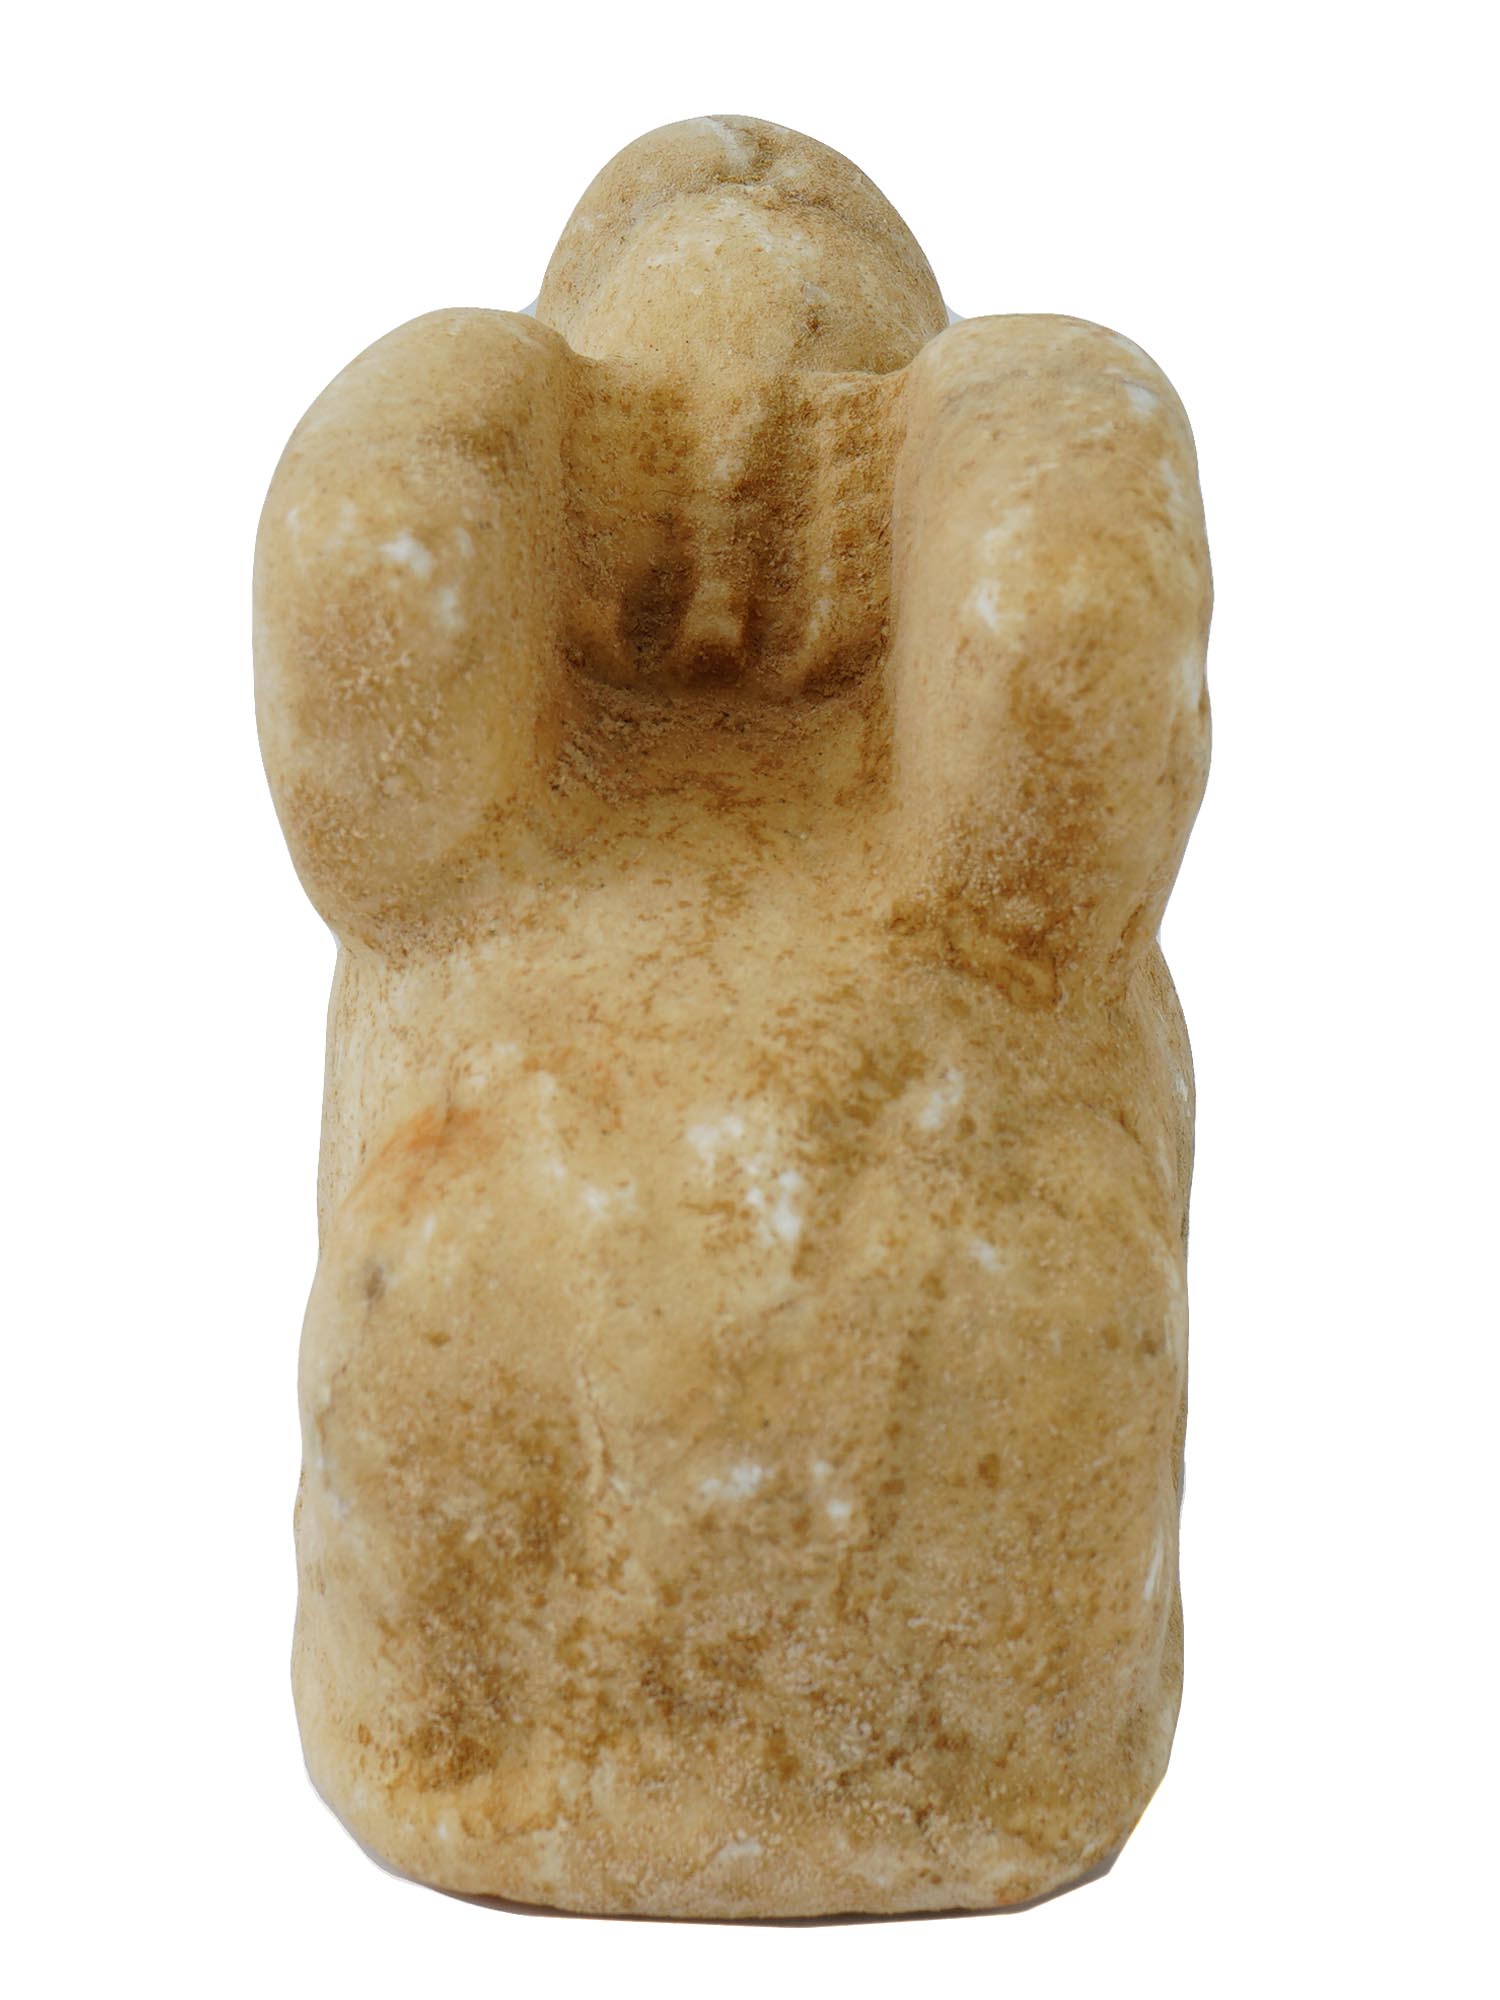 ANCIENT CARVED MARBLE SPHINX FIGURE WITH MYTHICAL FACE PIC-5